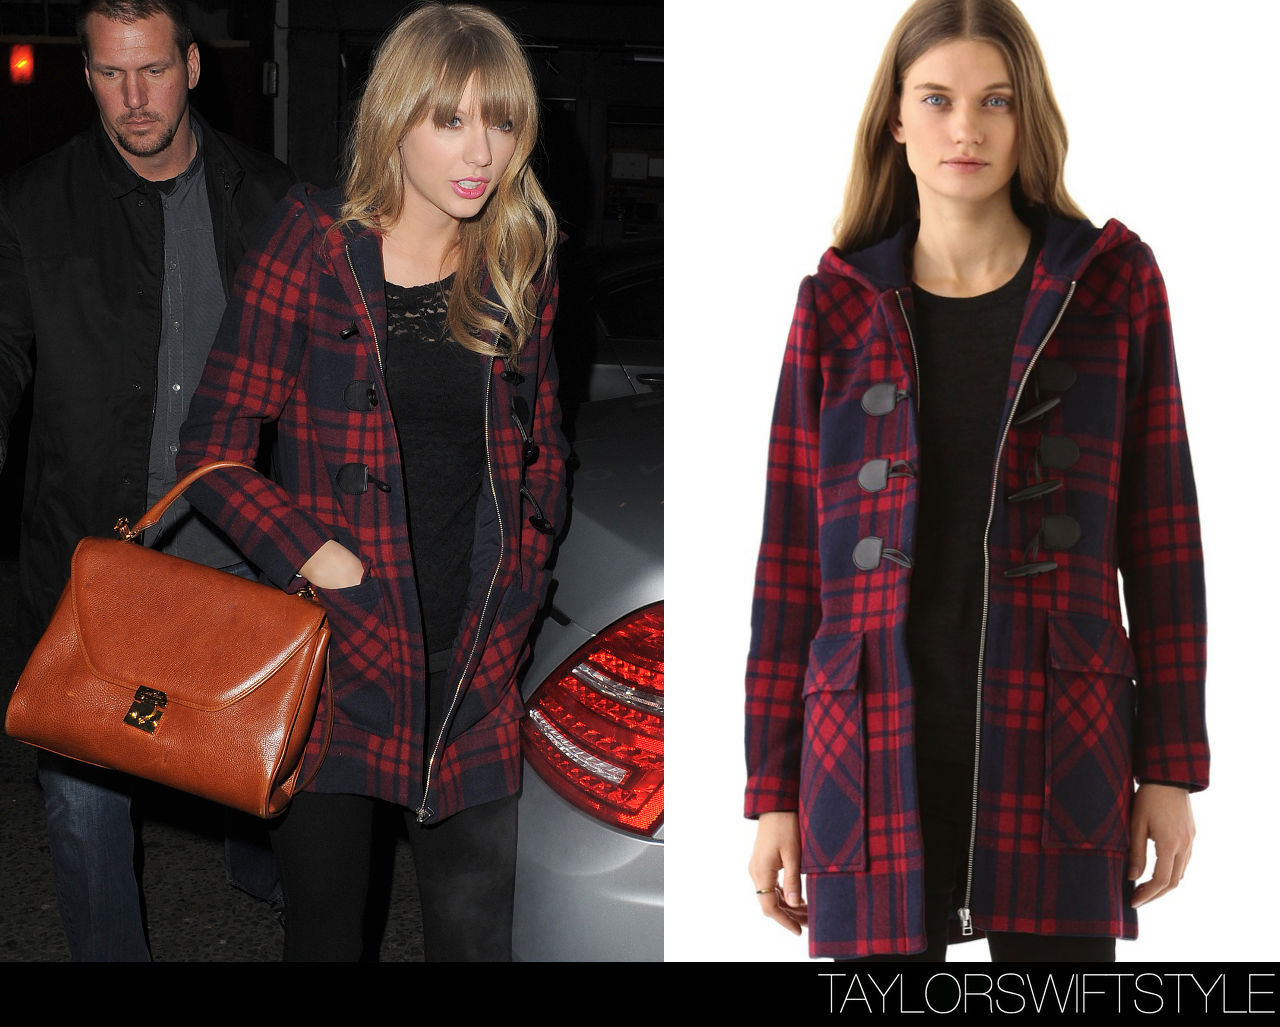 Arriving at Groucho Club | London, England | February 21, 2013Dolce Vita ‘Timia Plaid Coat’ - sold outAlso worn: Arriving at Cannes airportWorn with: Mark Cross Satchel